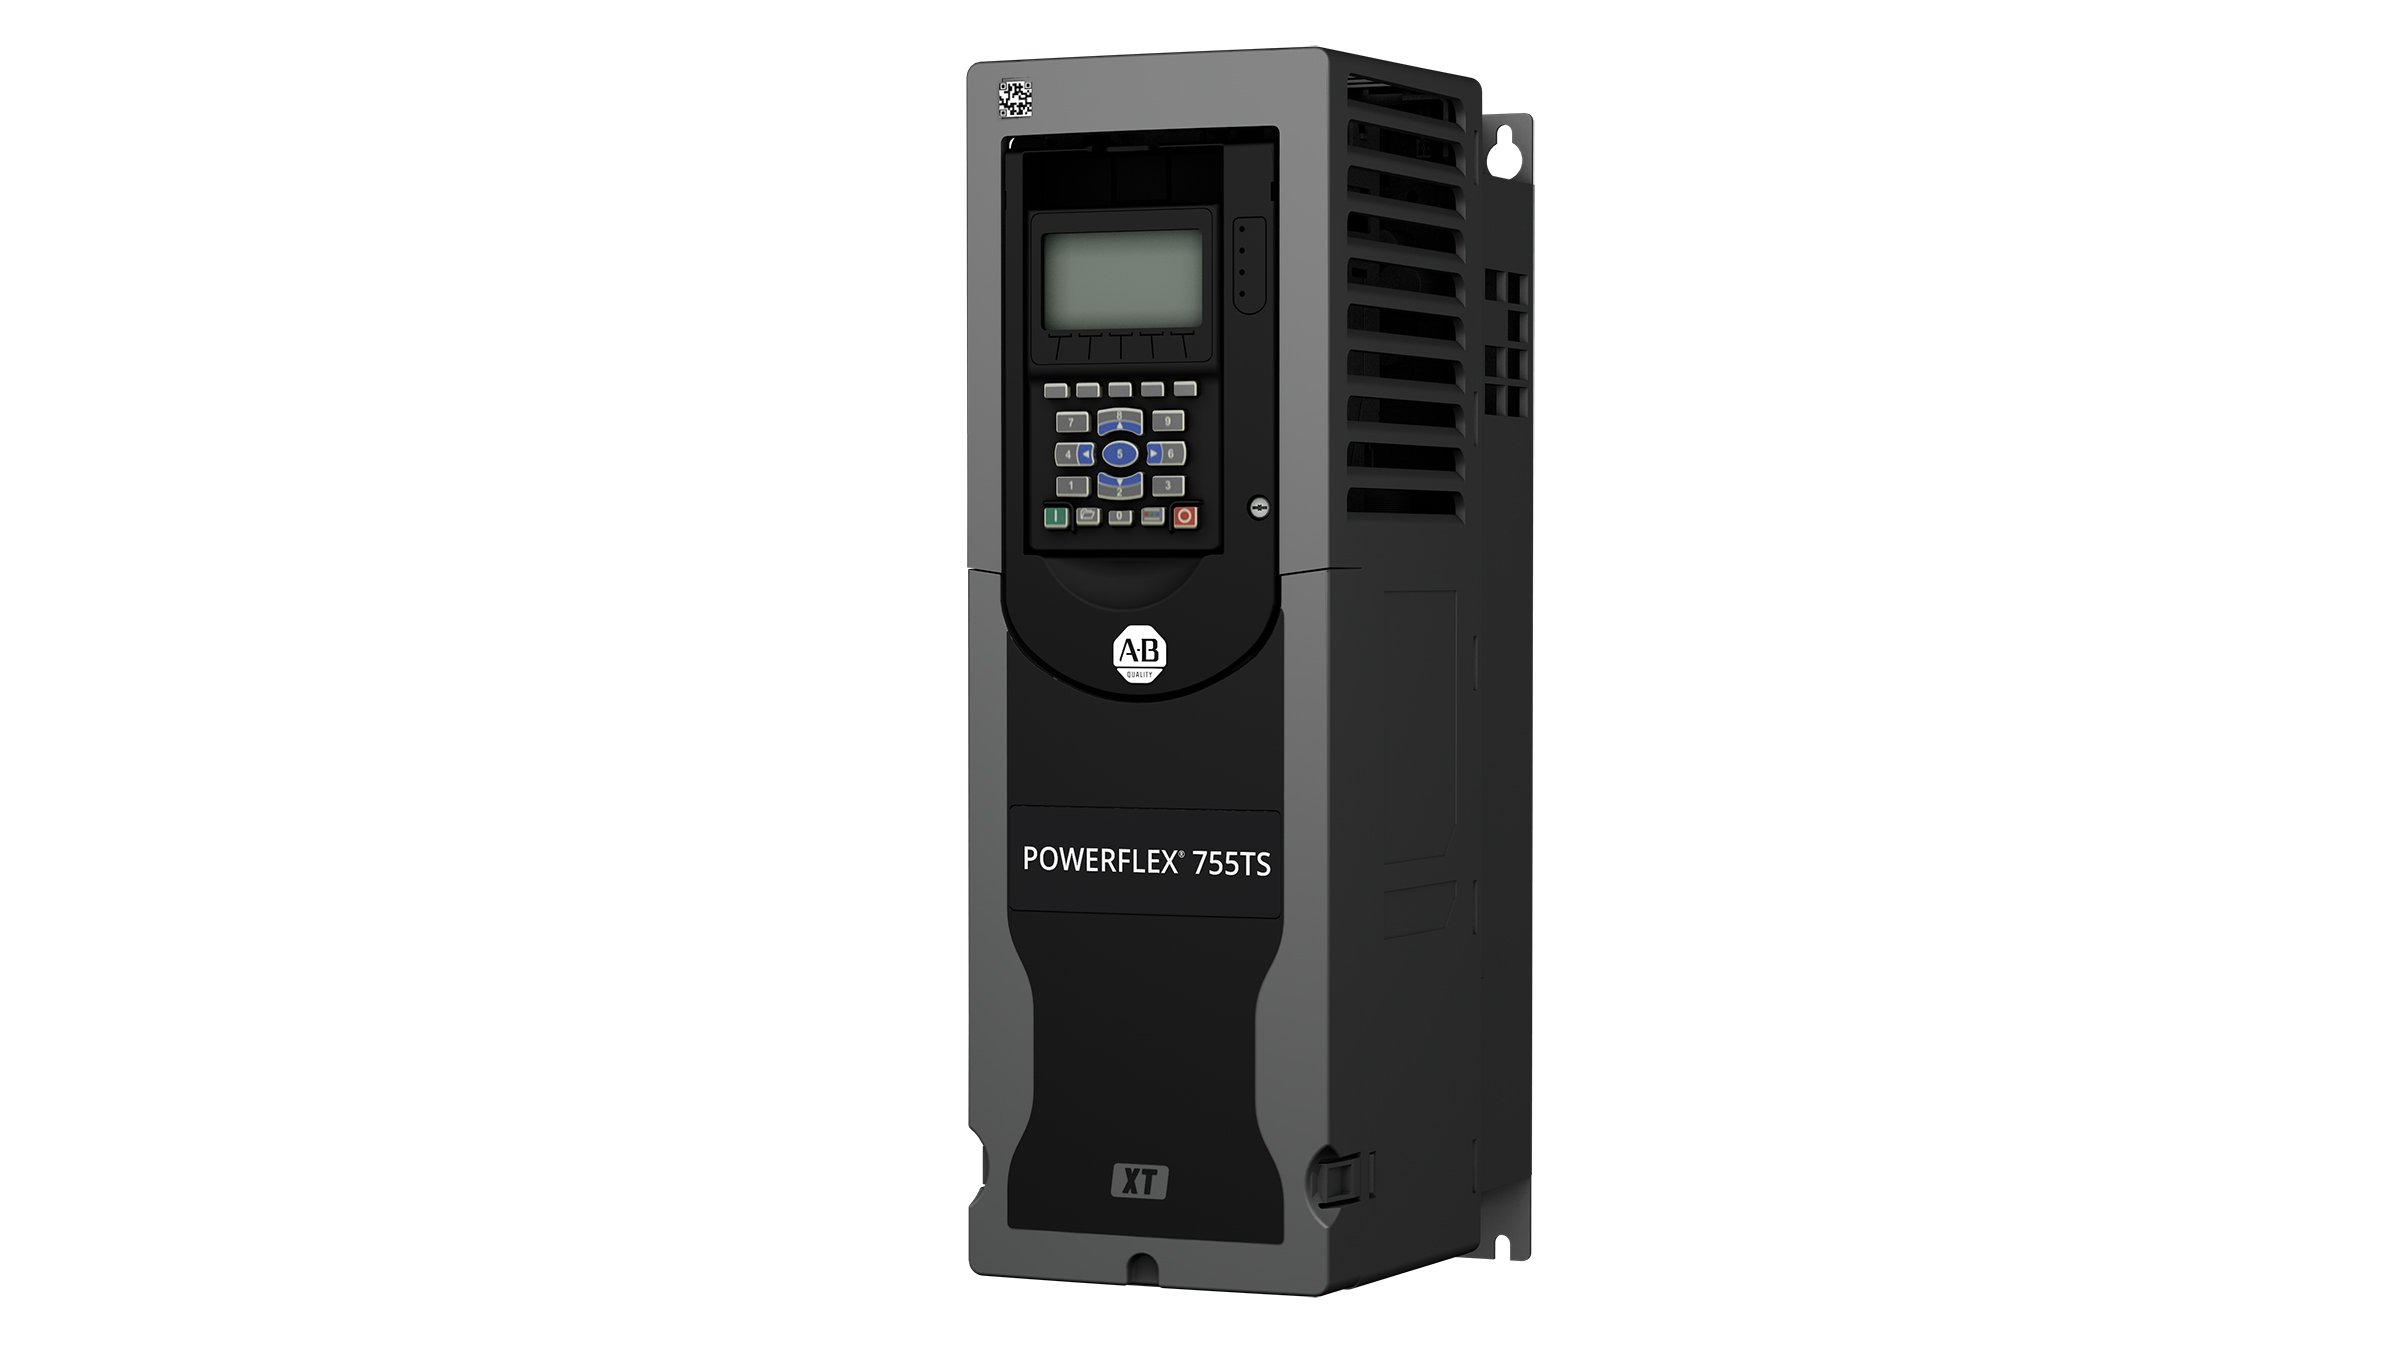 Dark grey rectangular PowerFlex 755TS variable frequency drive with buttons on front and screen and special XT design for corrosive gas protection